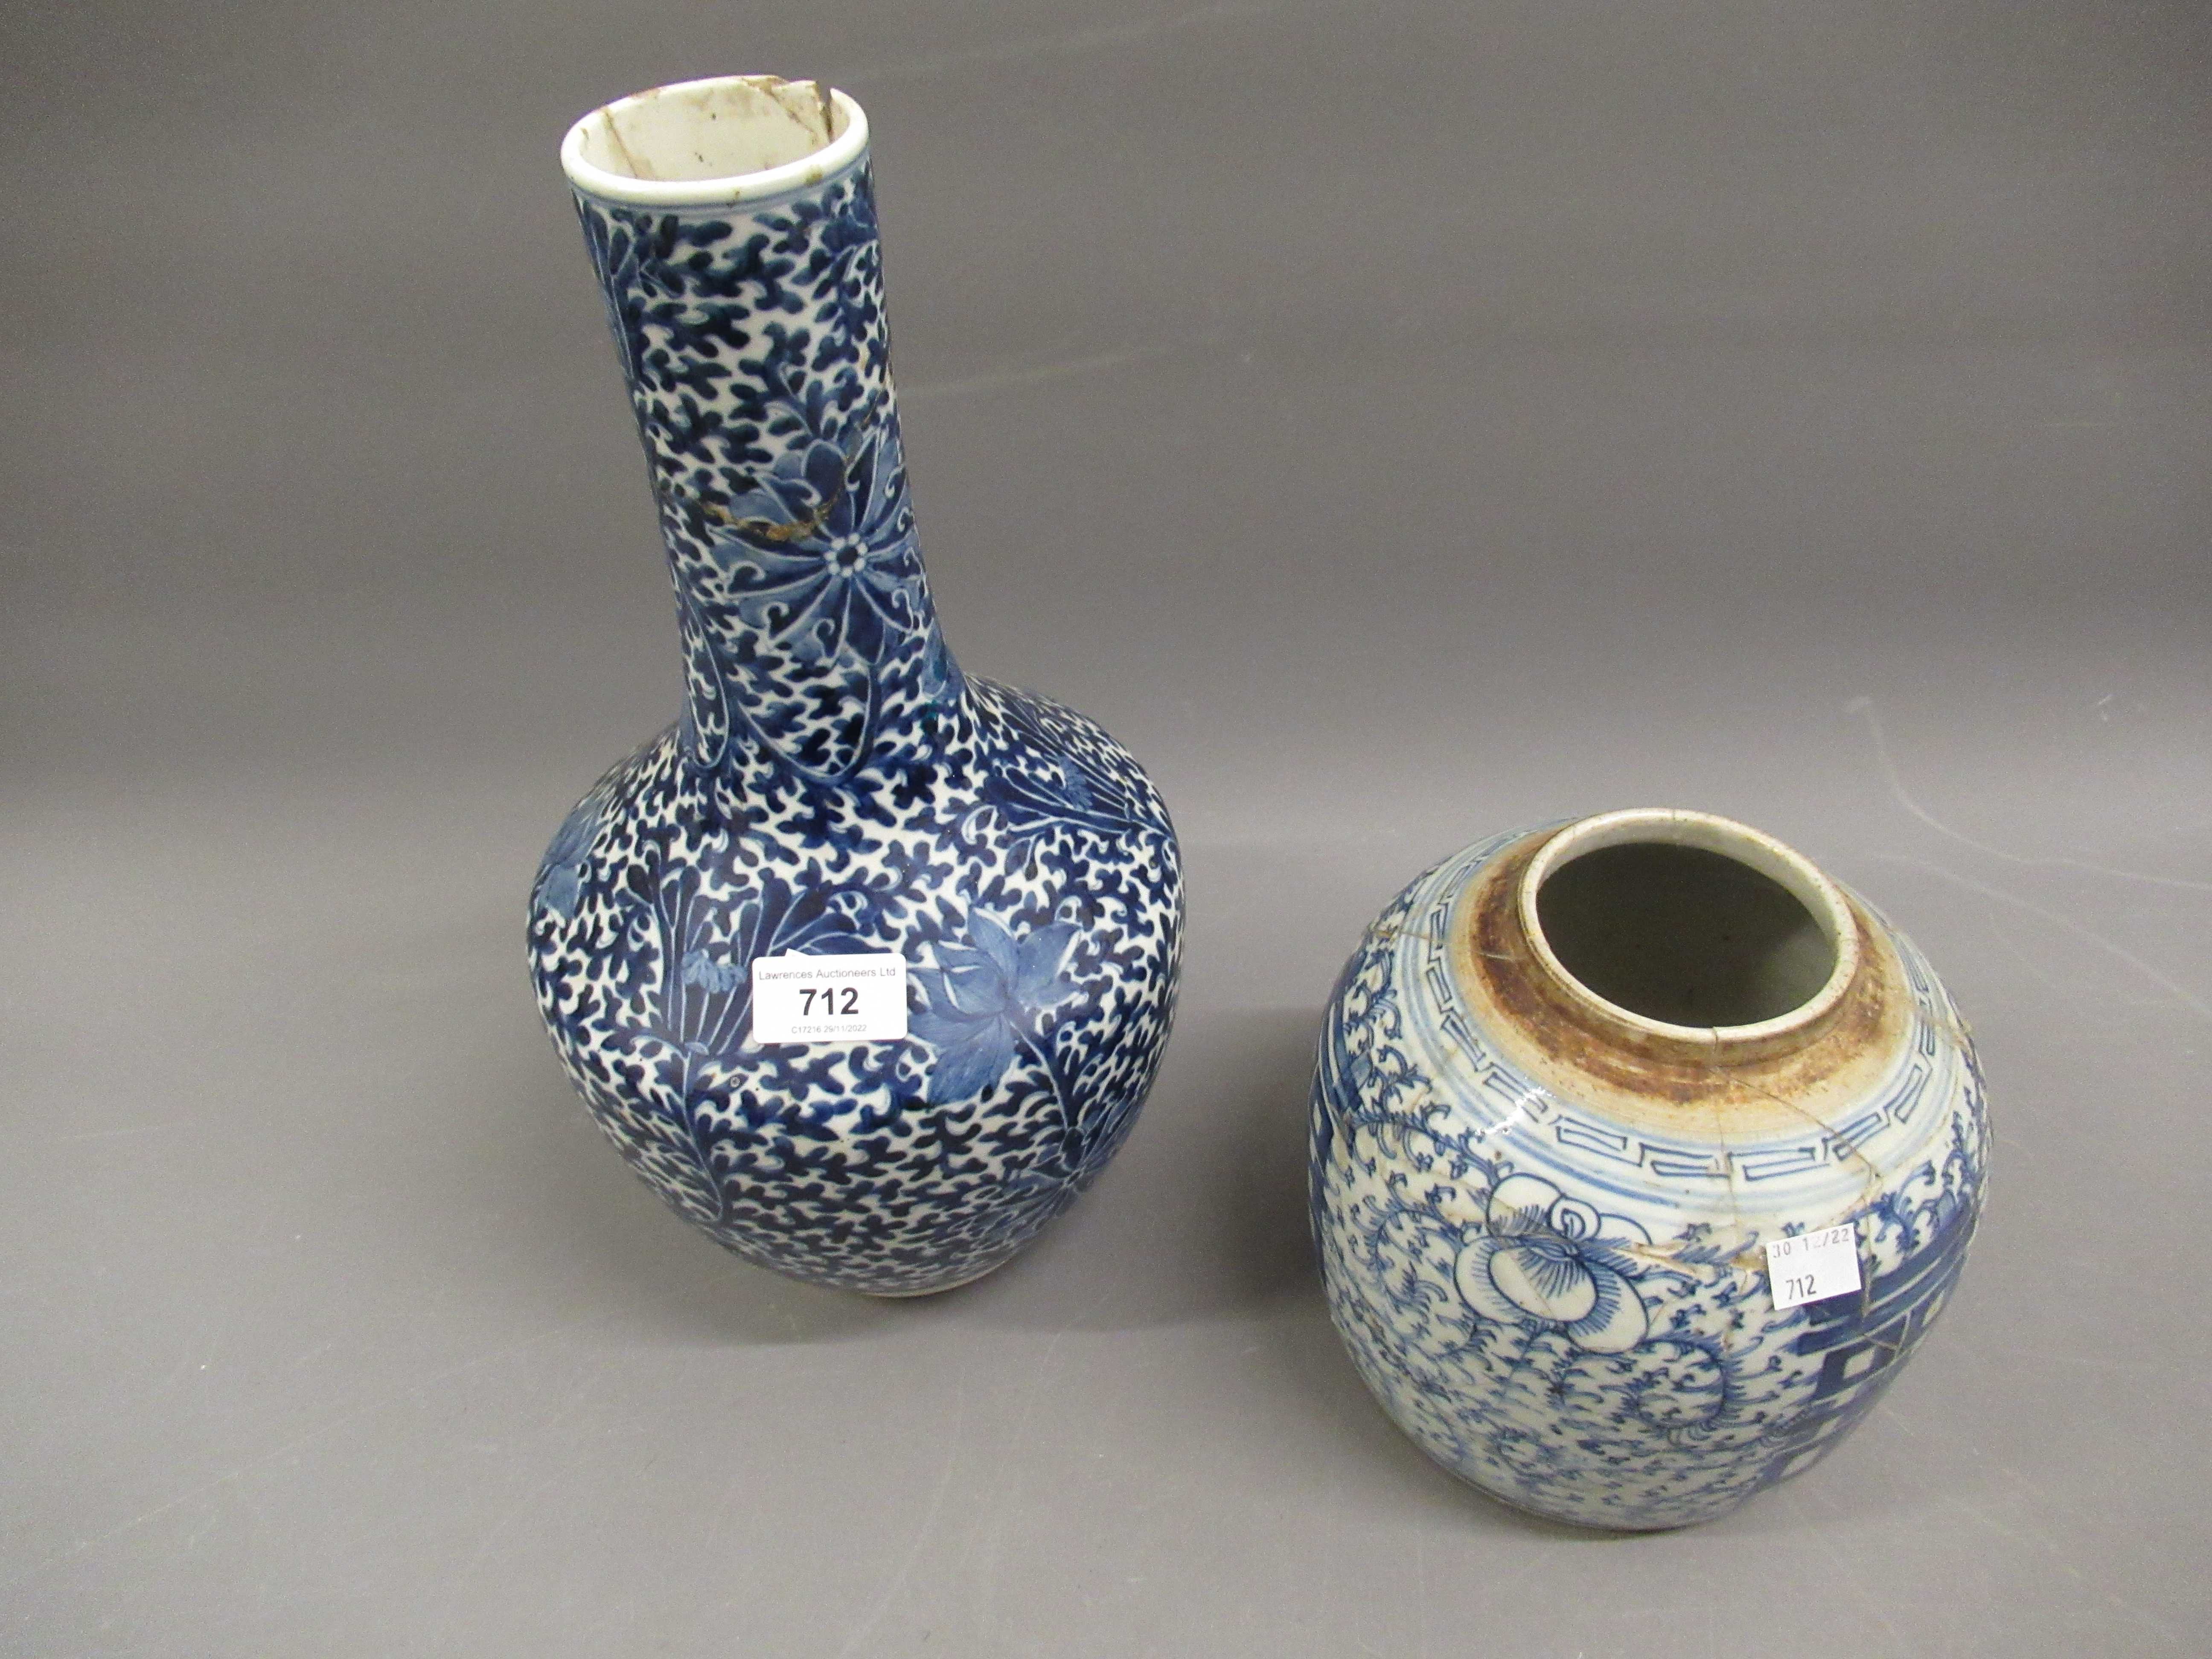 Chinese blue and white baluster form vase with all-over floral decoration, with four character